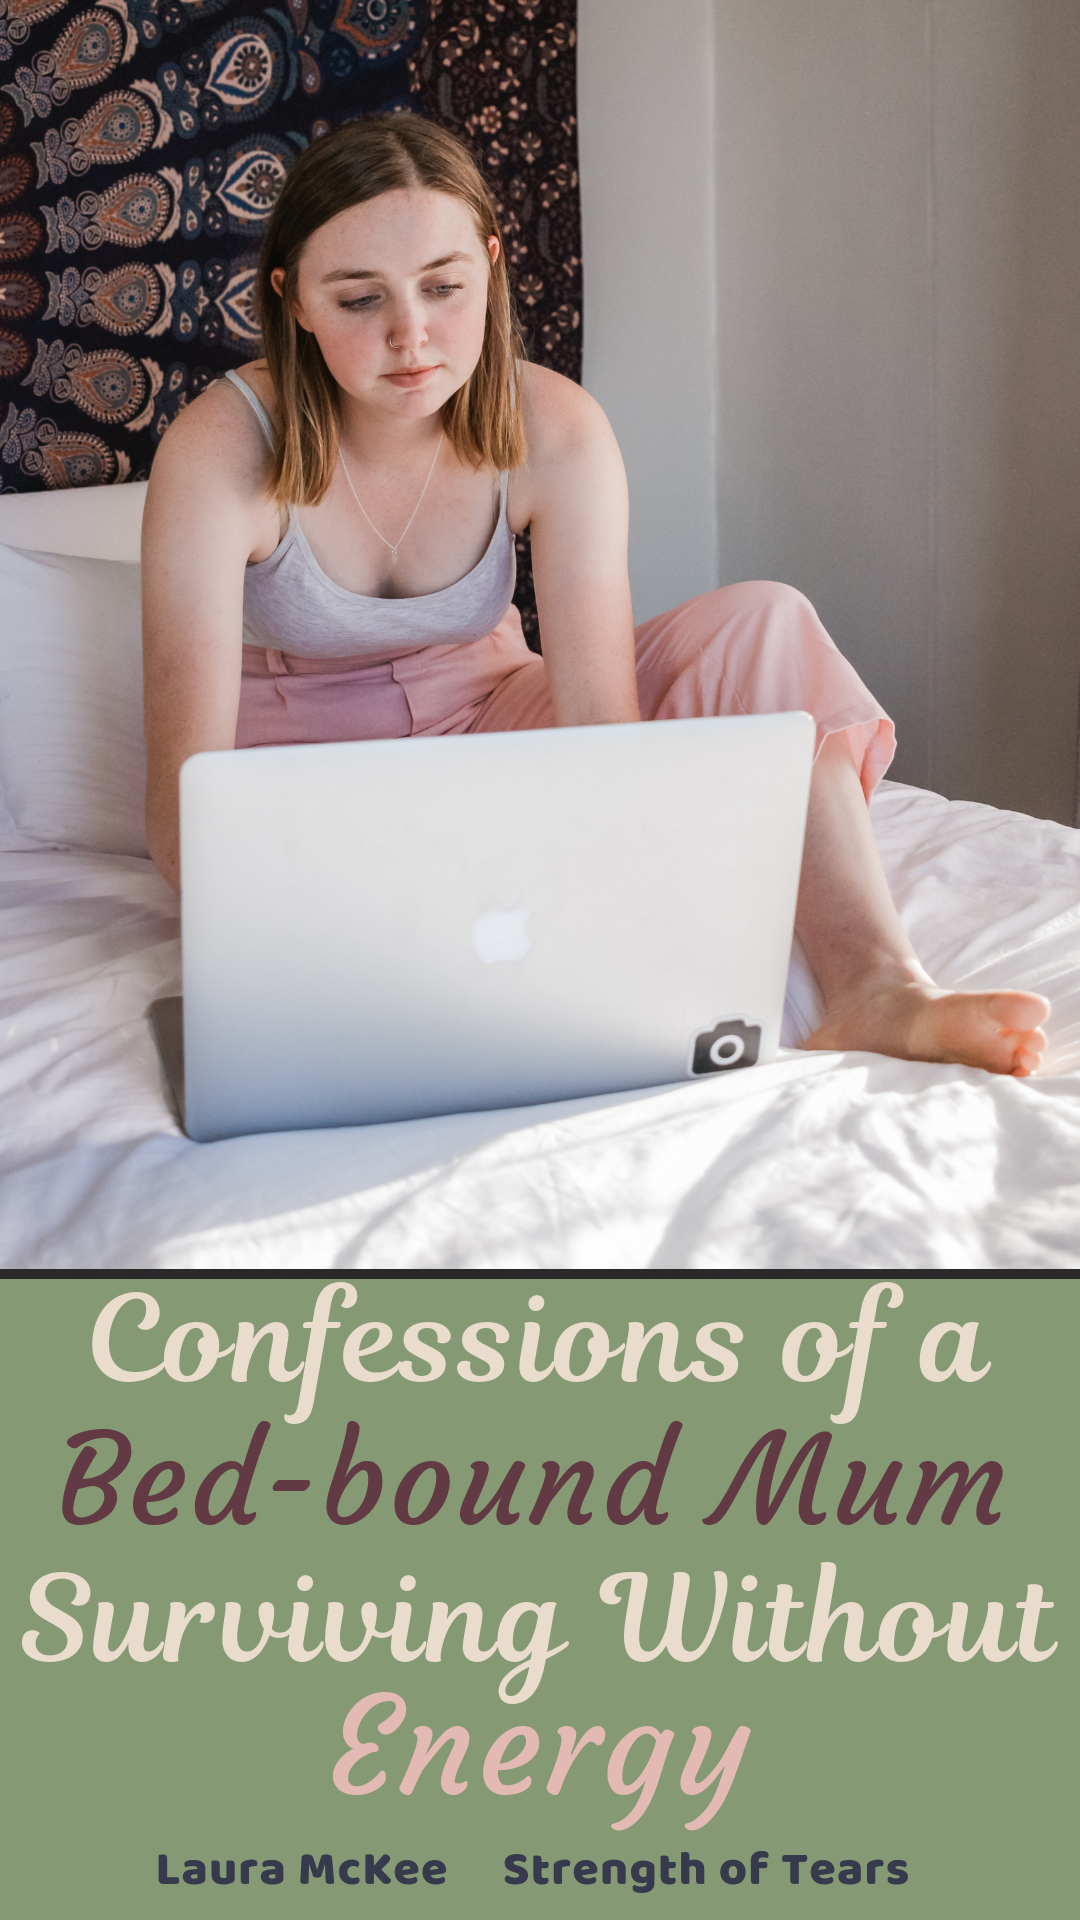 Woman in grey vest and pink trouser sitting in a white bed with a laptop open. Bottom third in green saying Confessions of a bed-bound Mum